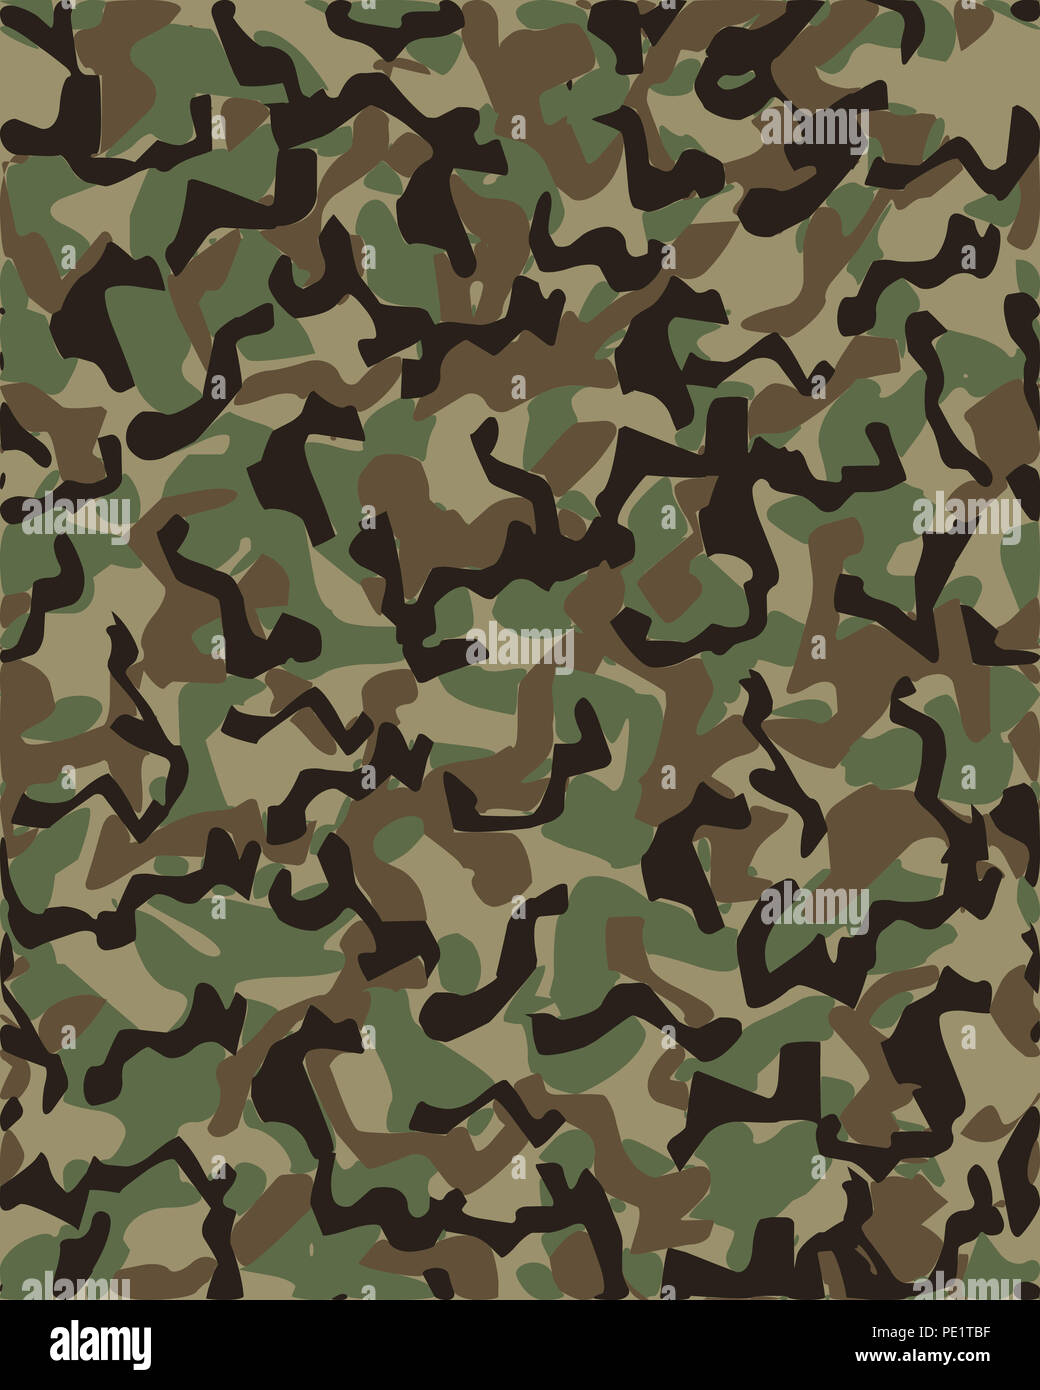 Leopard Seamless Pattern On Camouflage Military Stock Vector